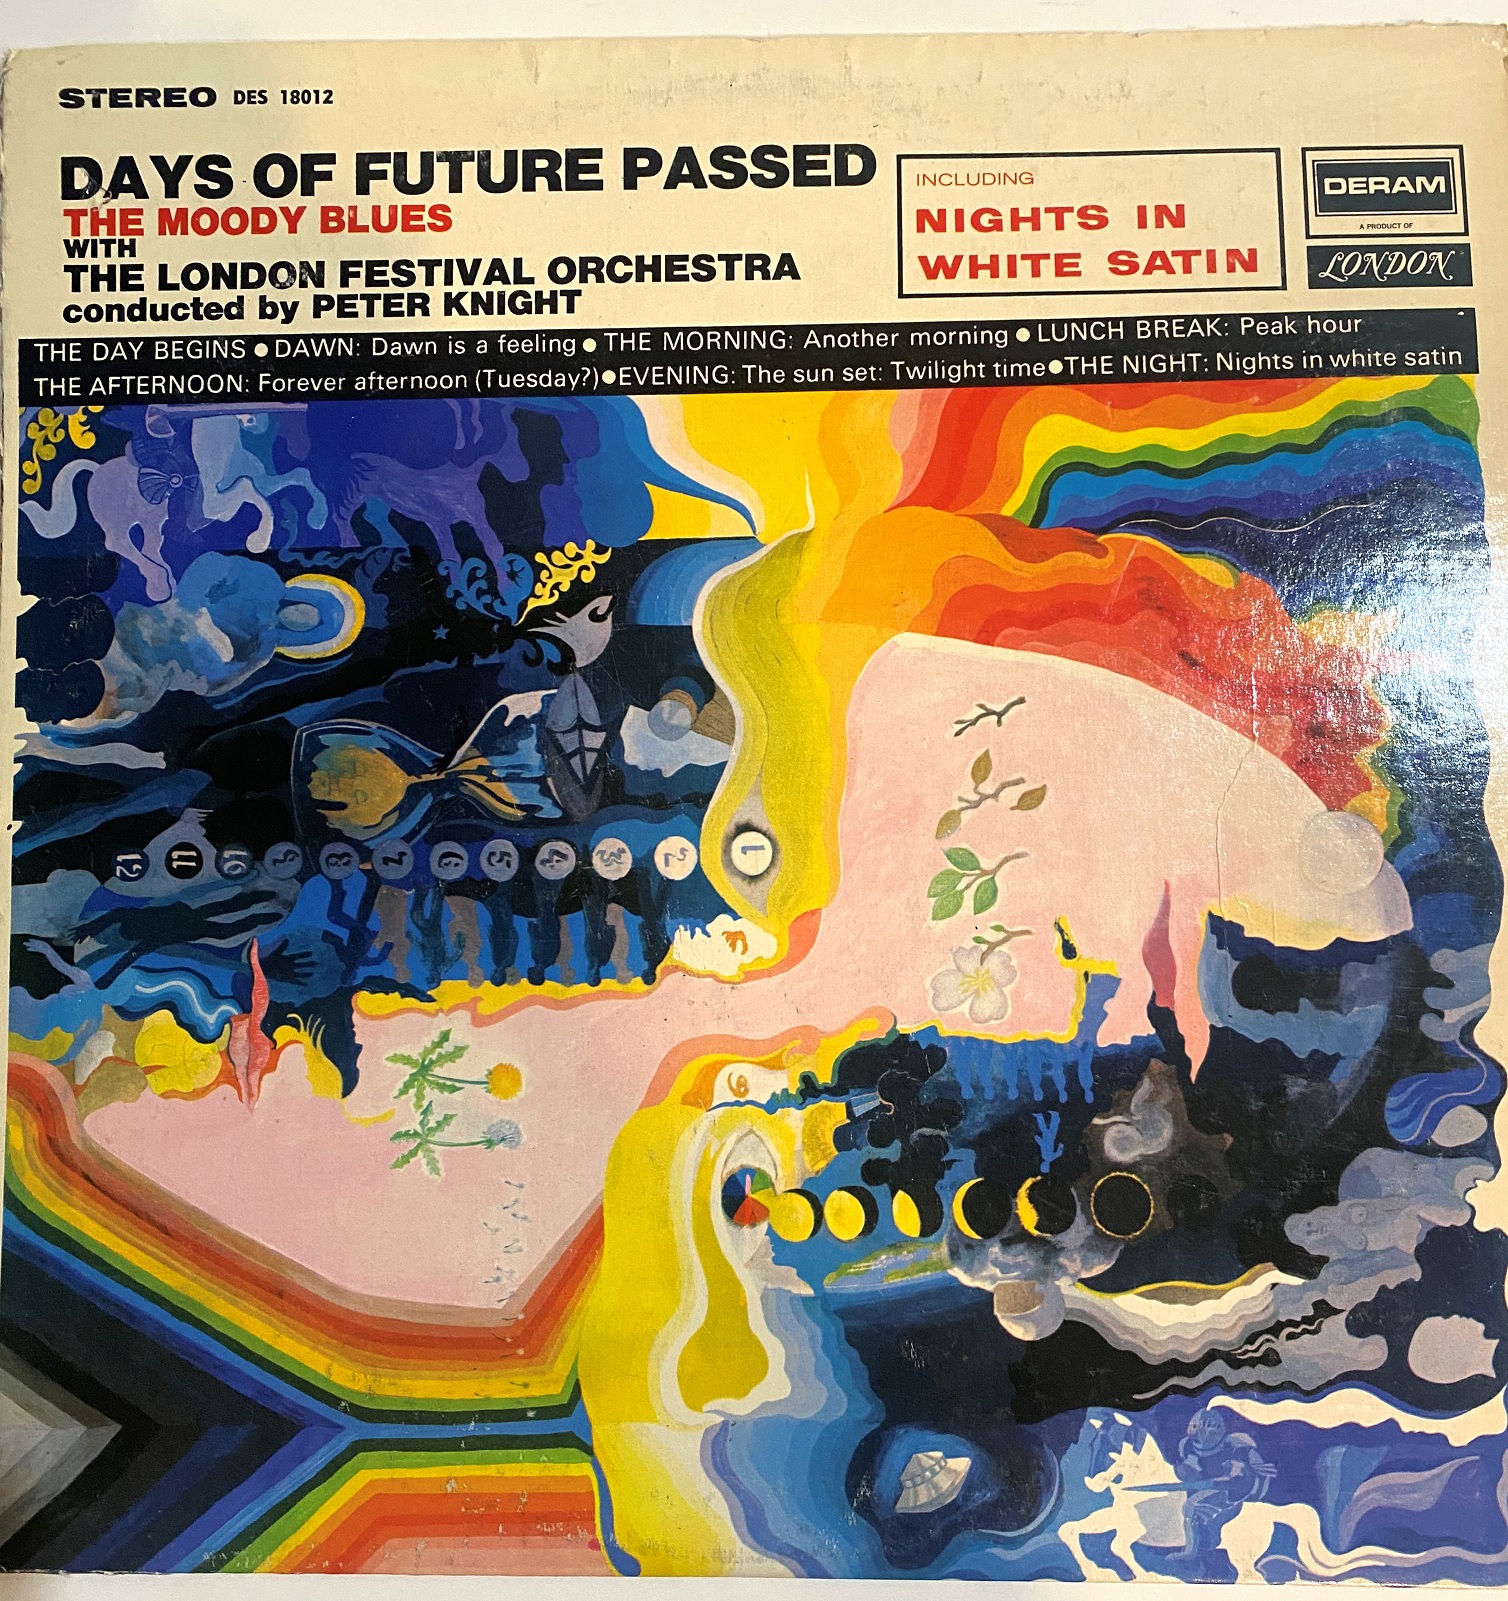 Step Back in Time with Moody Blues' Timeless Vinyl Record |Days of Future Passed